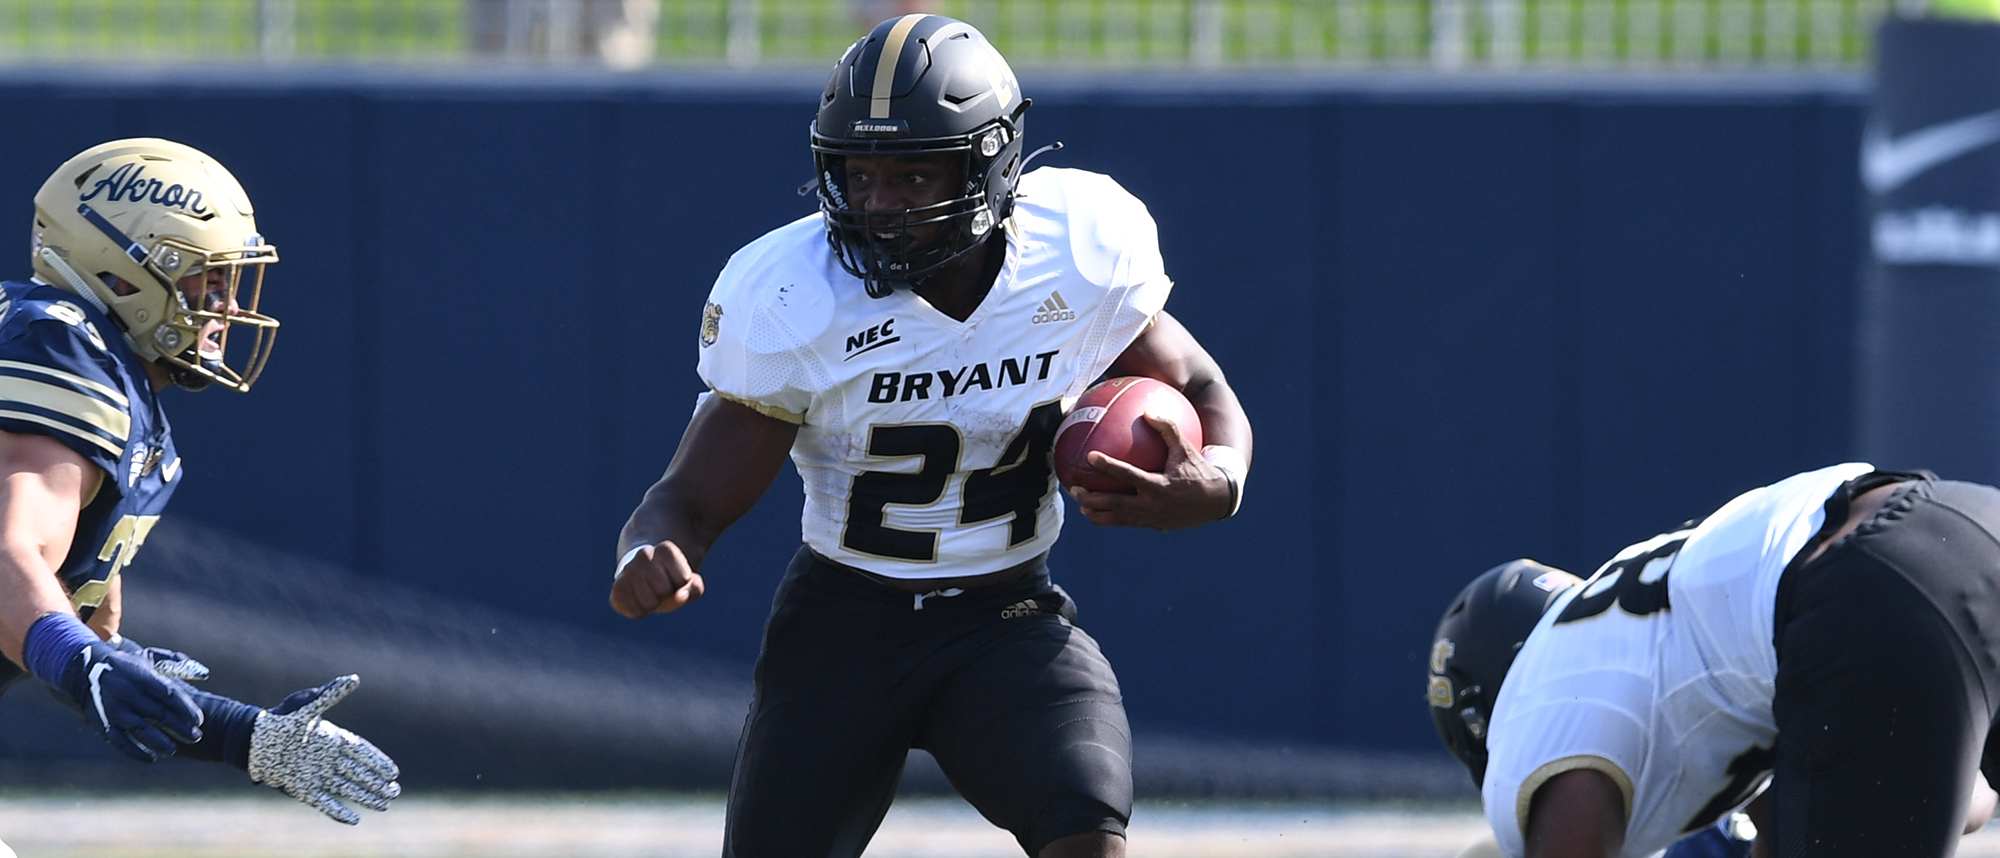 Bryant falls to Akron on Saturday